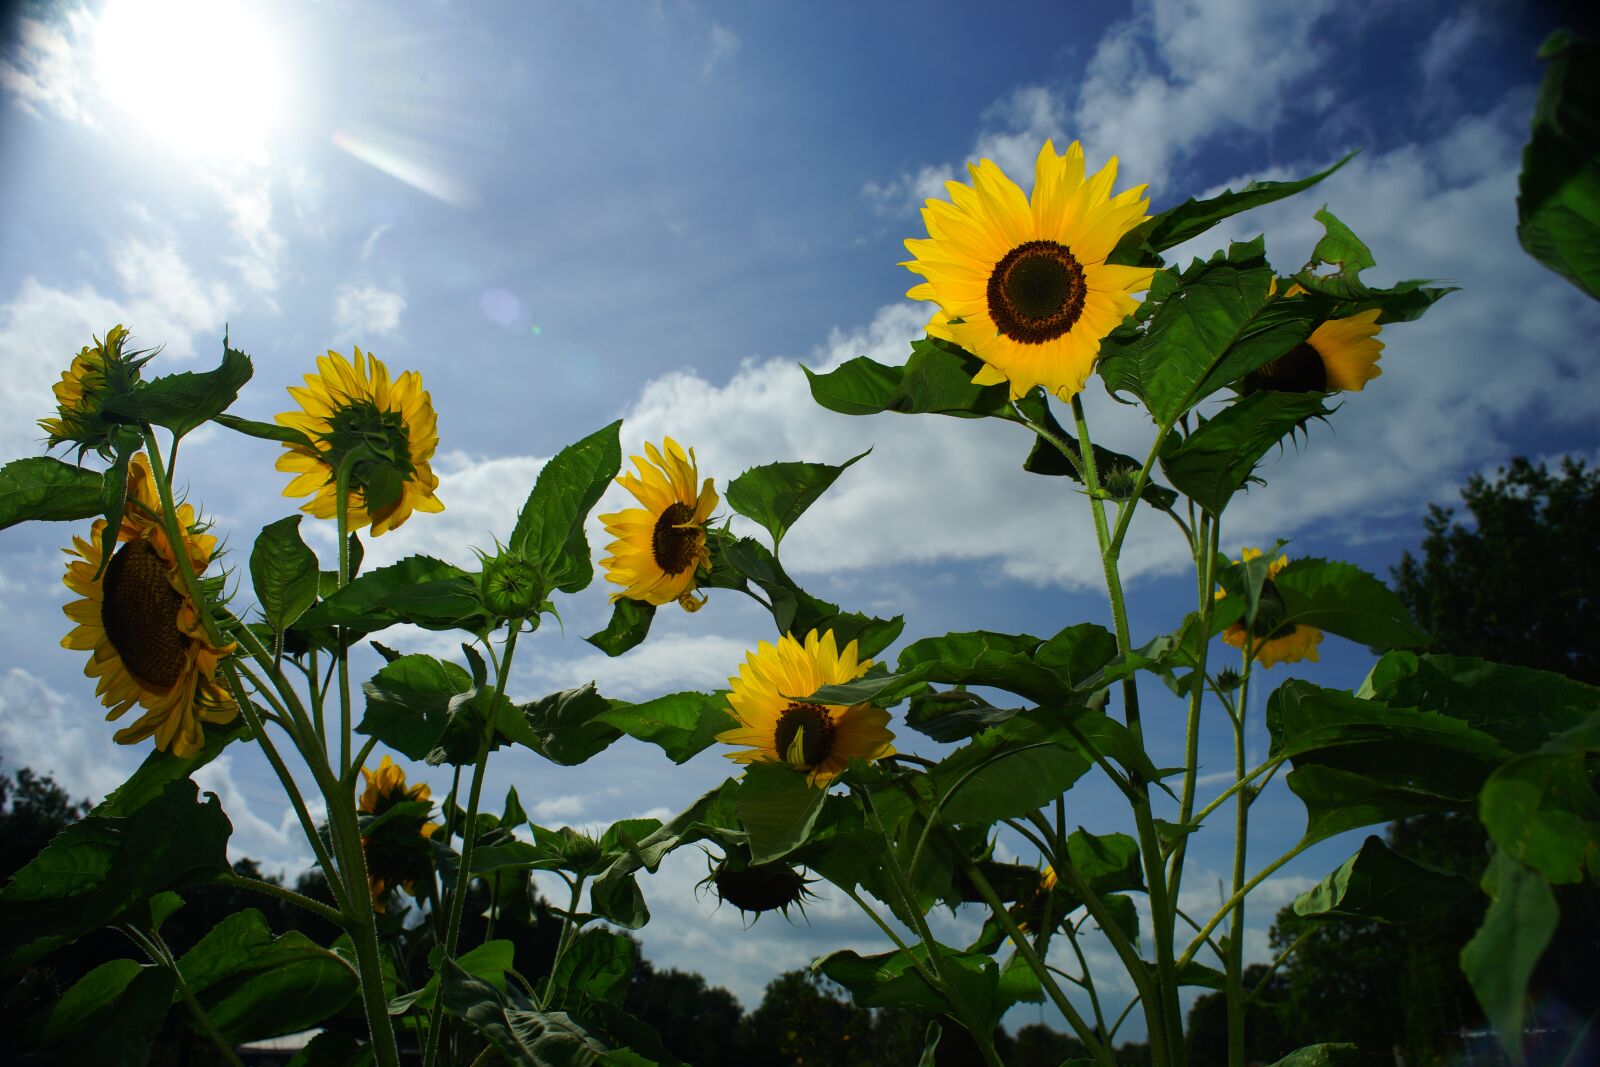 24mm F2.8 sample photo. Sunflower, yellow, against direction photography